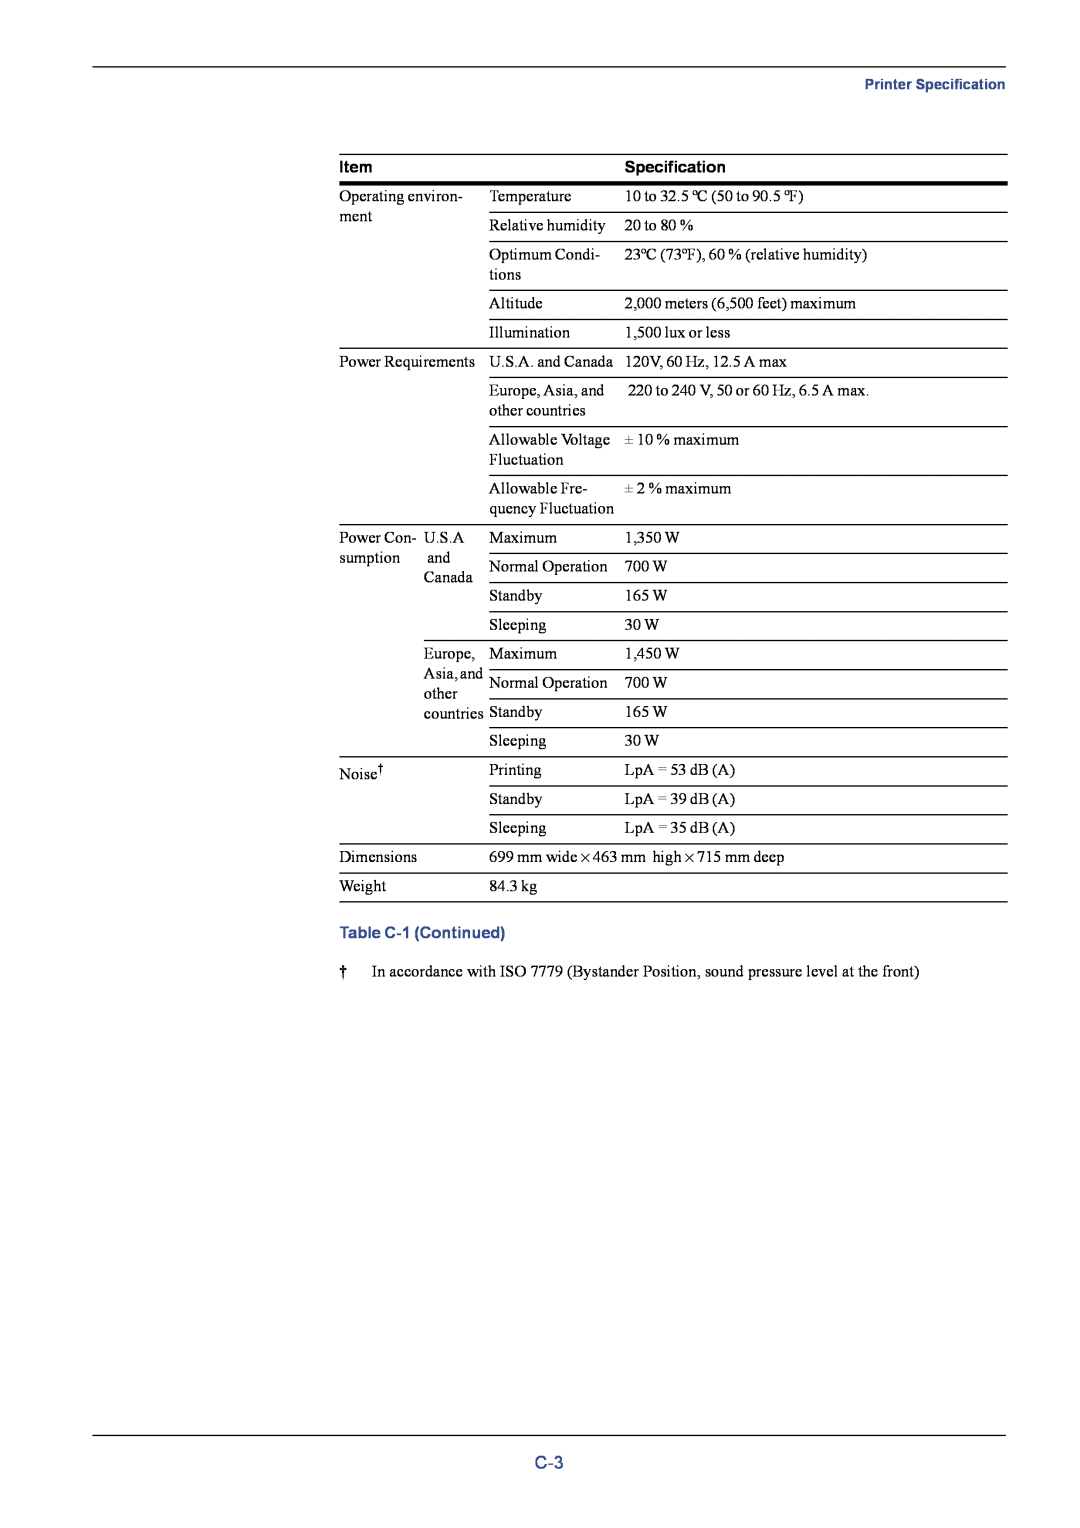 Kyocera C8026N manual Specification, Table C-1 Continued 